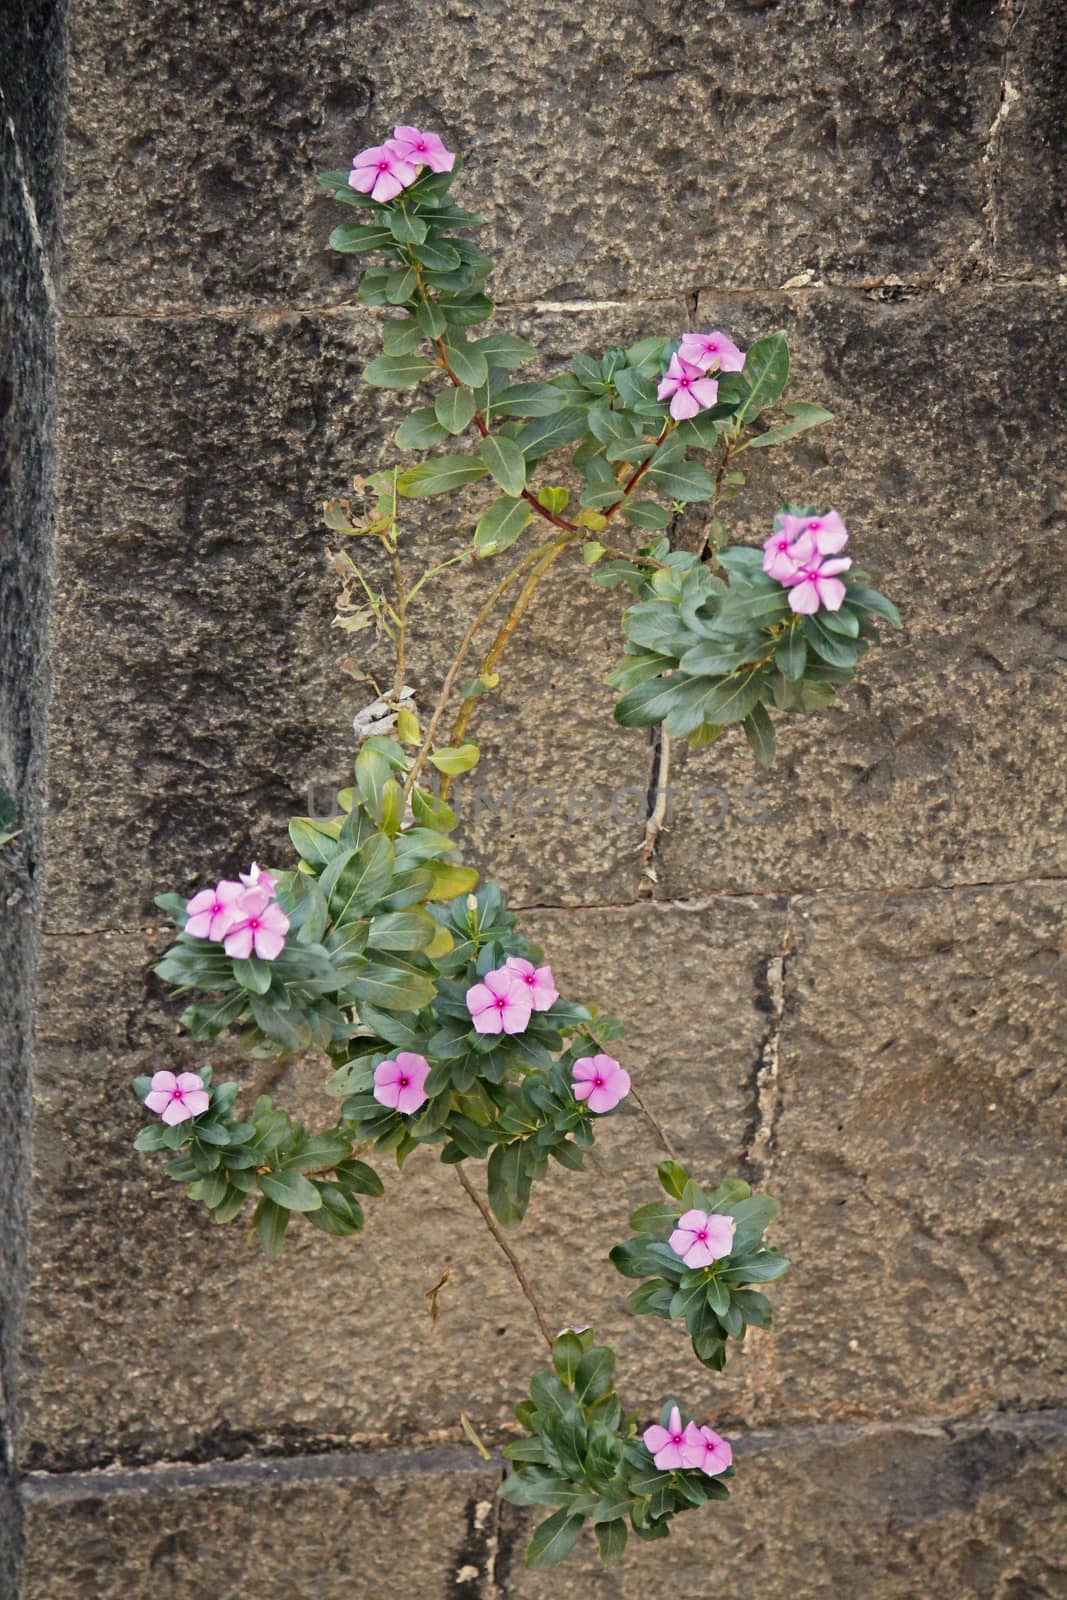 atharanthus roseus, commonly known as the Madagascar periwinkle, is a species of Catharanthus